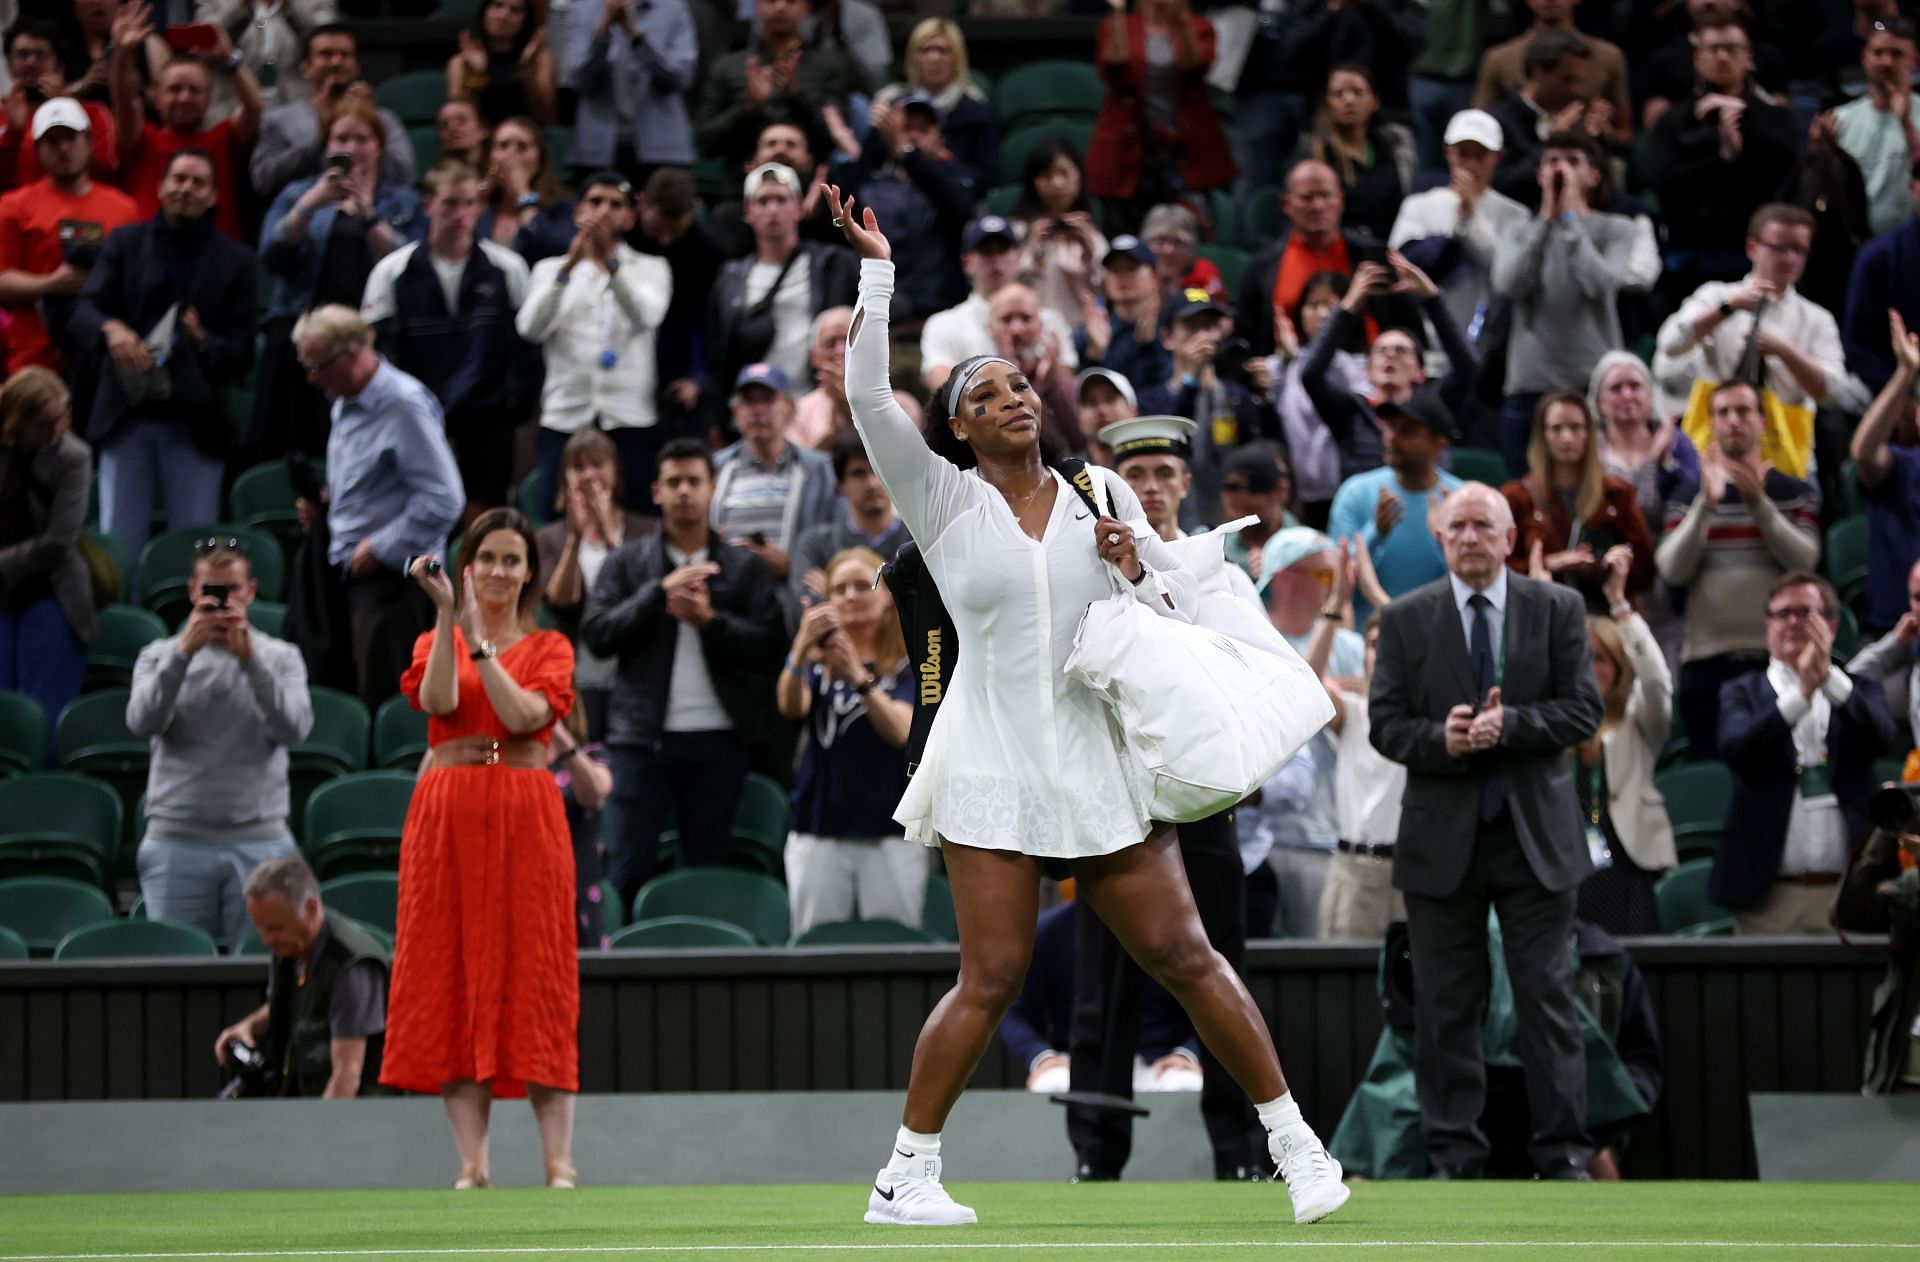 Serena Williams greets the crowd. Photo by Clive Brunskill/Getty Images